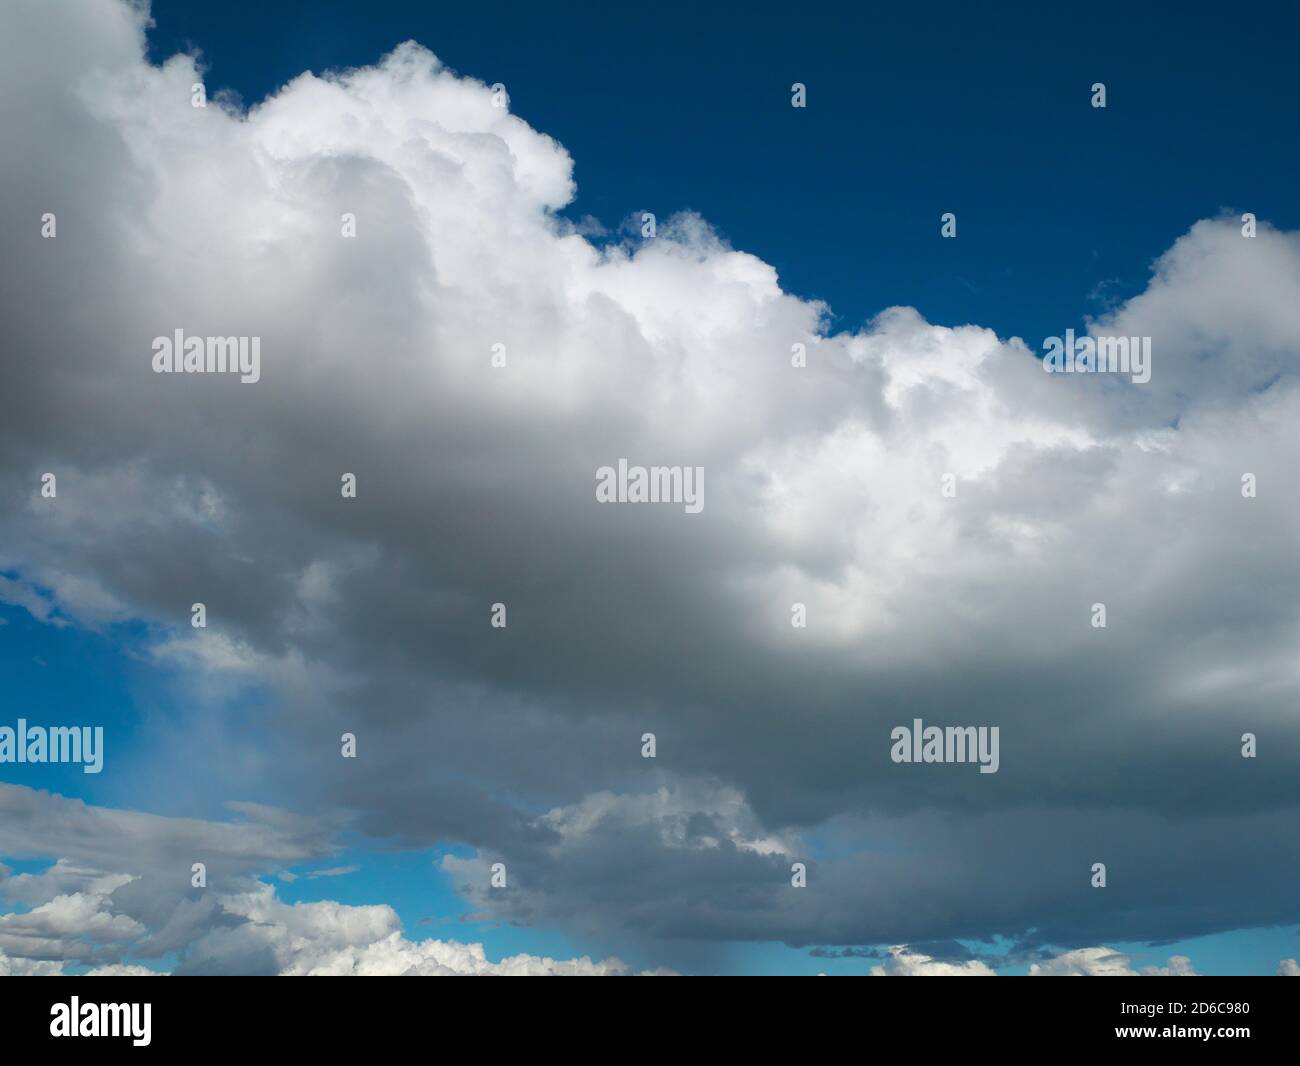 Close-up on thick white clouds in the sky Stock Photo